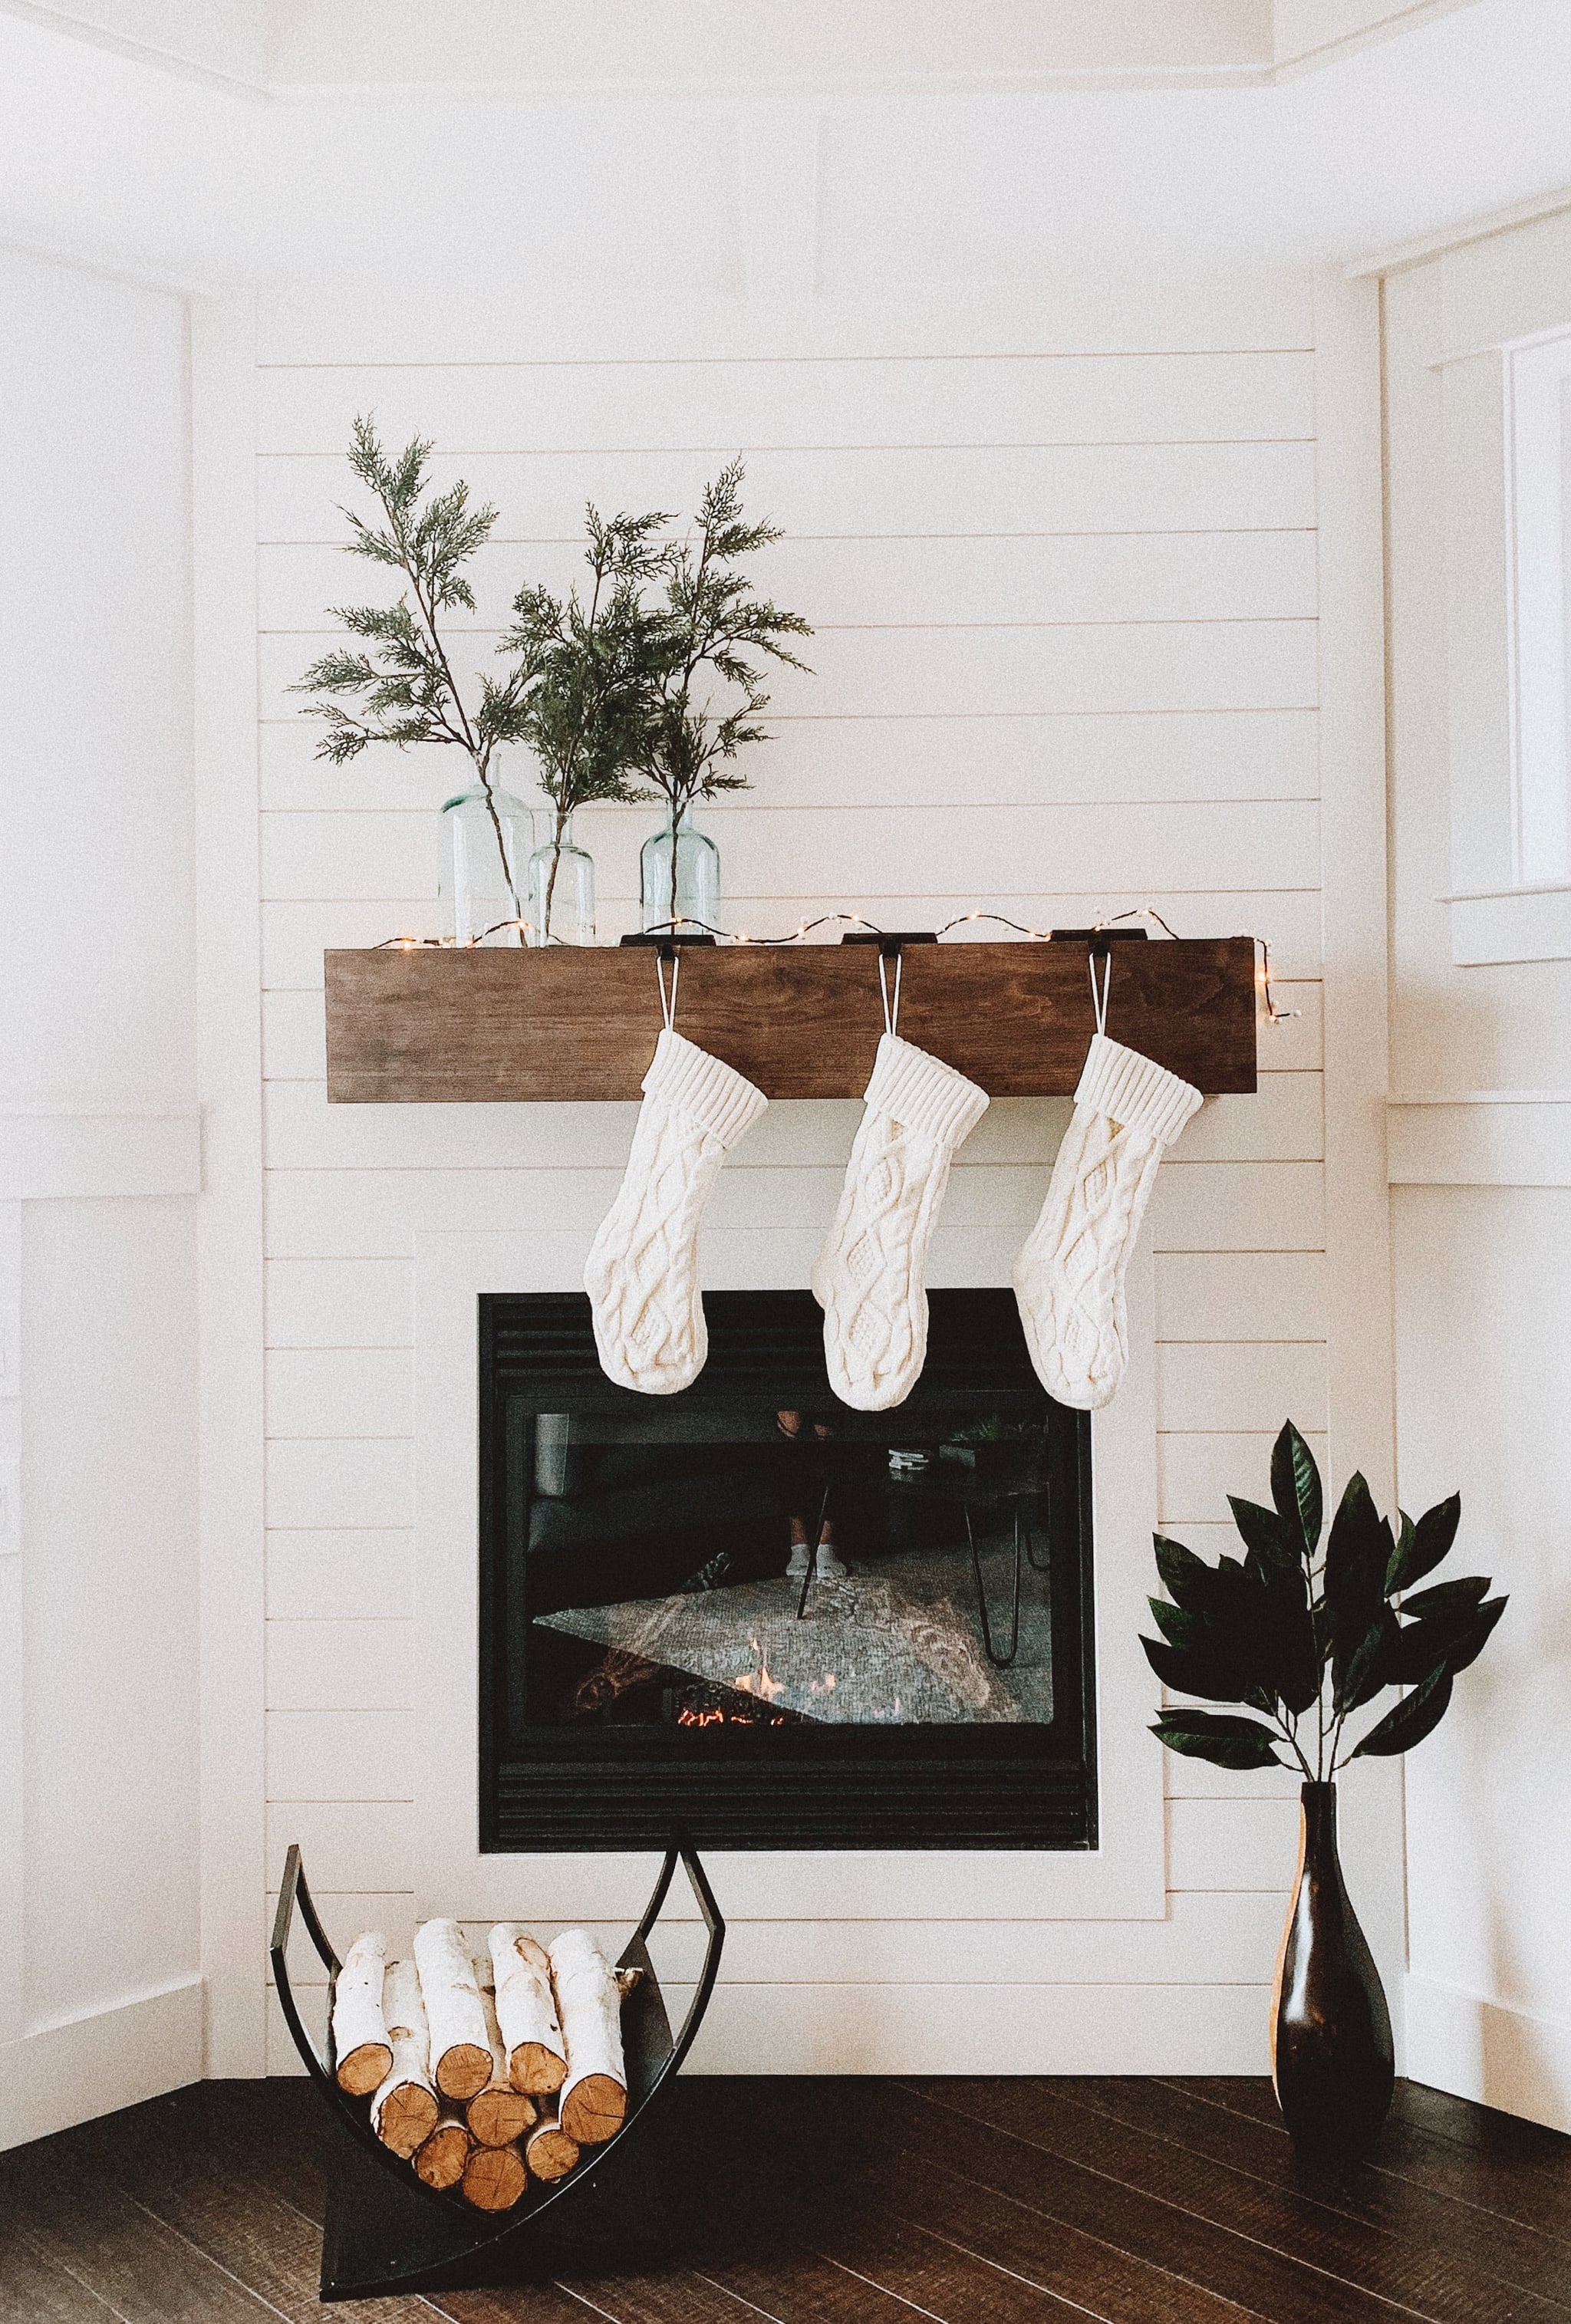 A fireplace with stockings hanging above it - White Christmas, Christmas iPhone